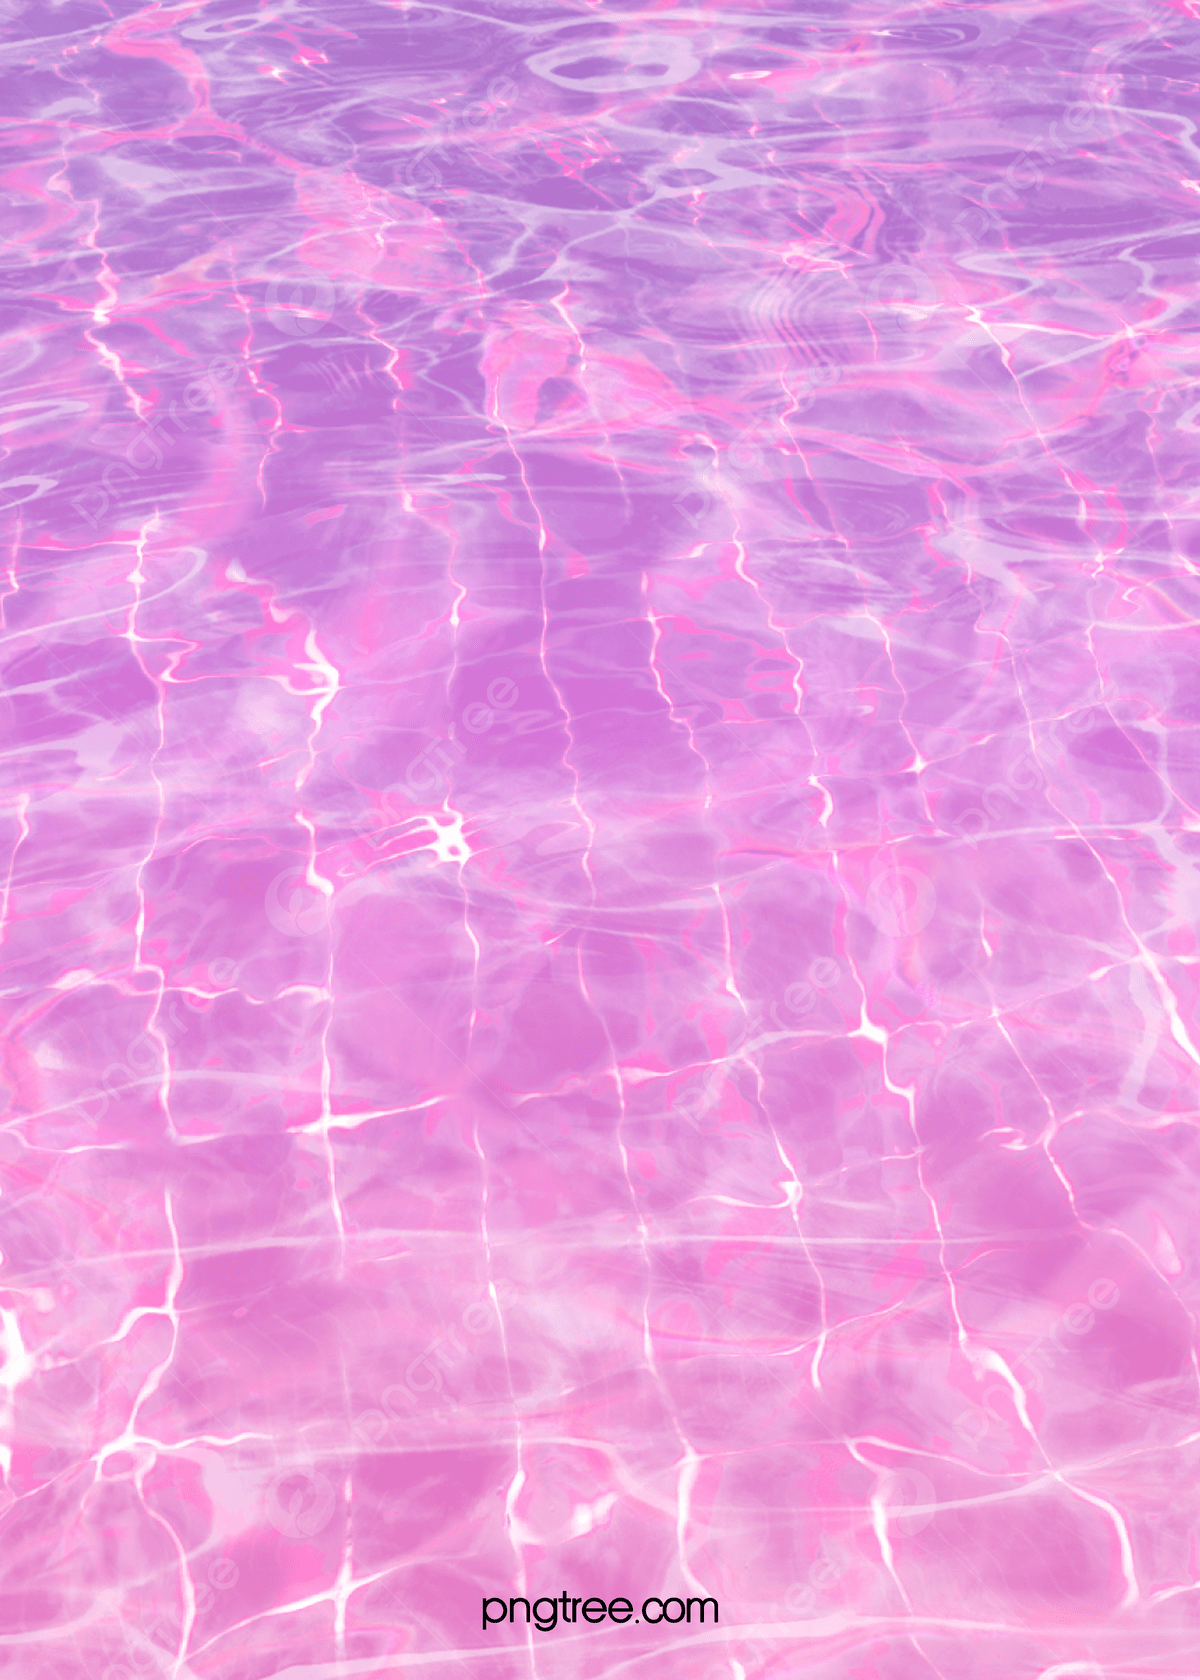 Pink Creative Texture Swimming Pool Background Wallpaper Image For Free Download